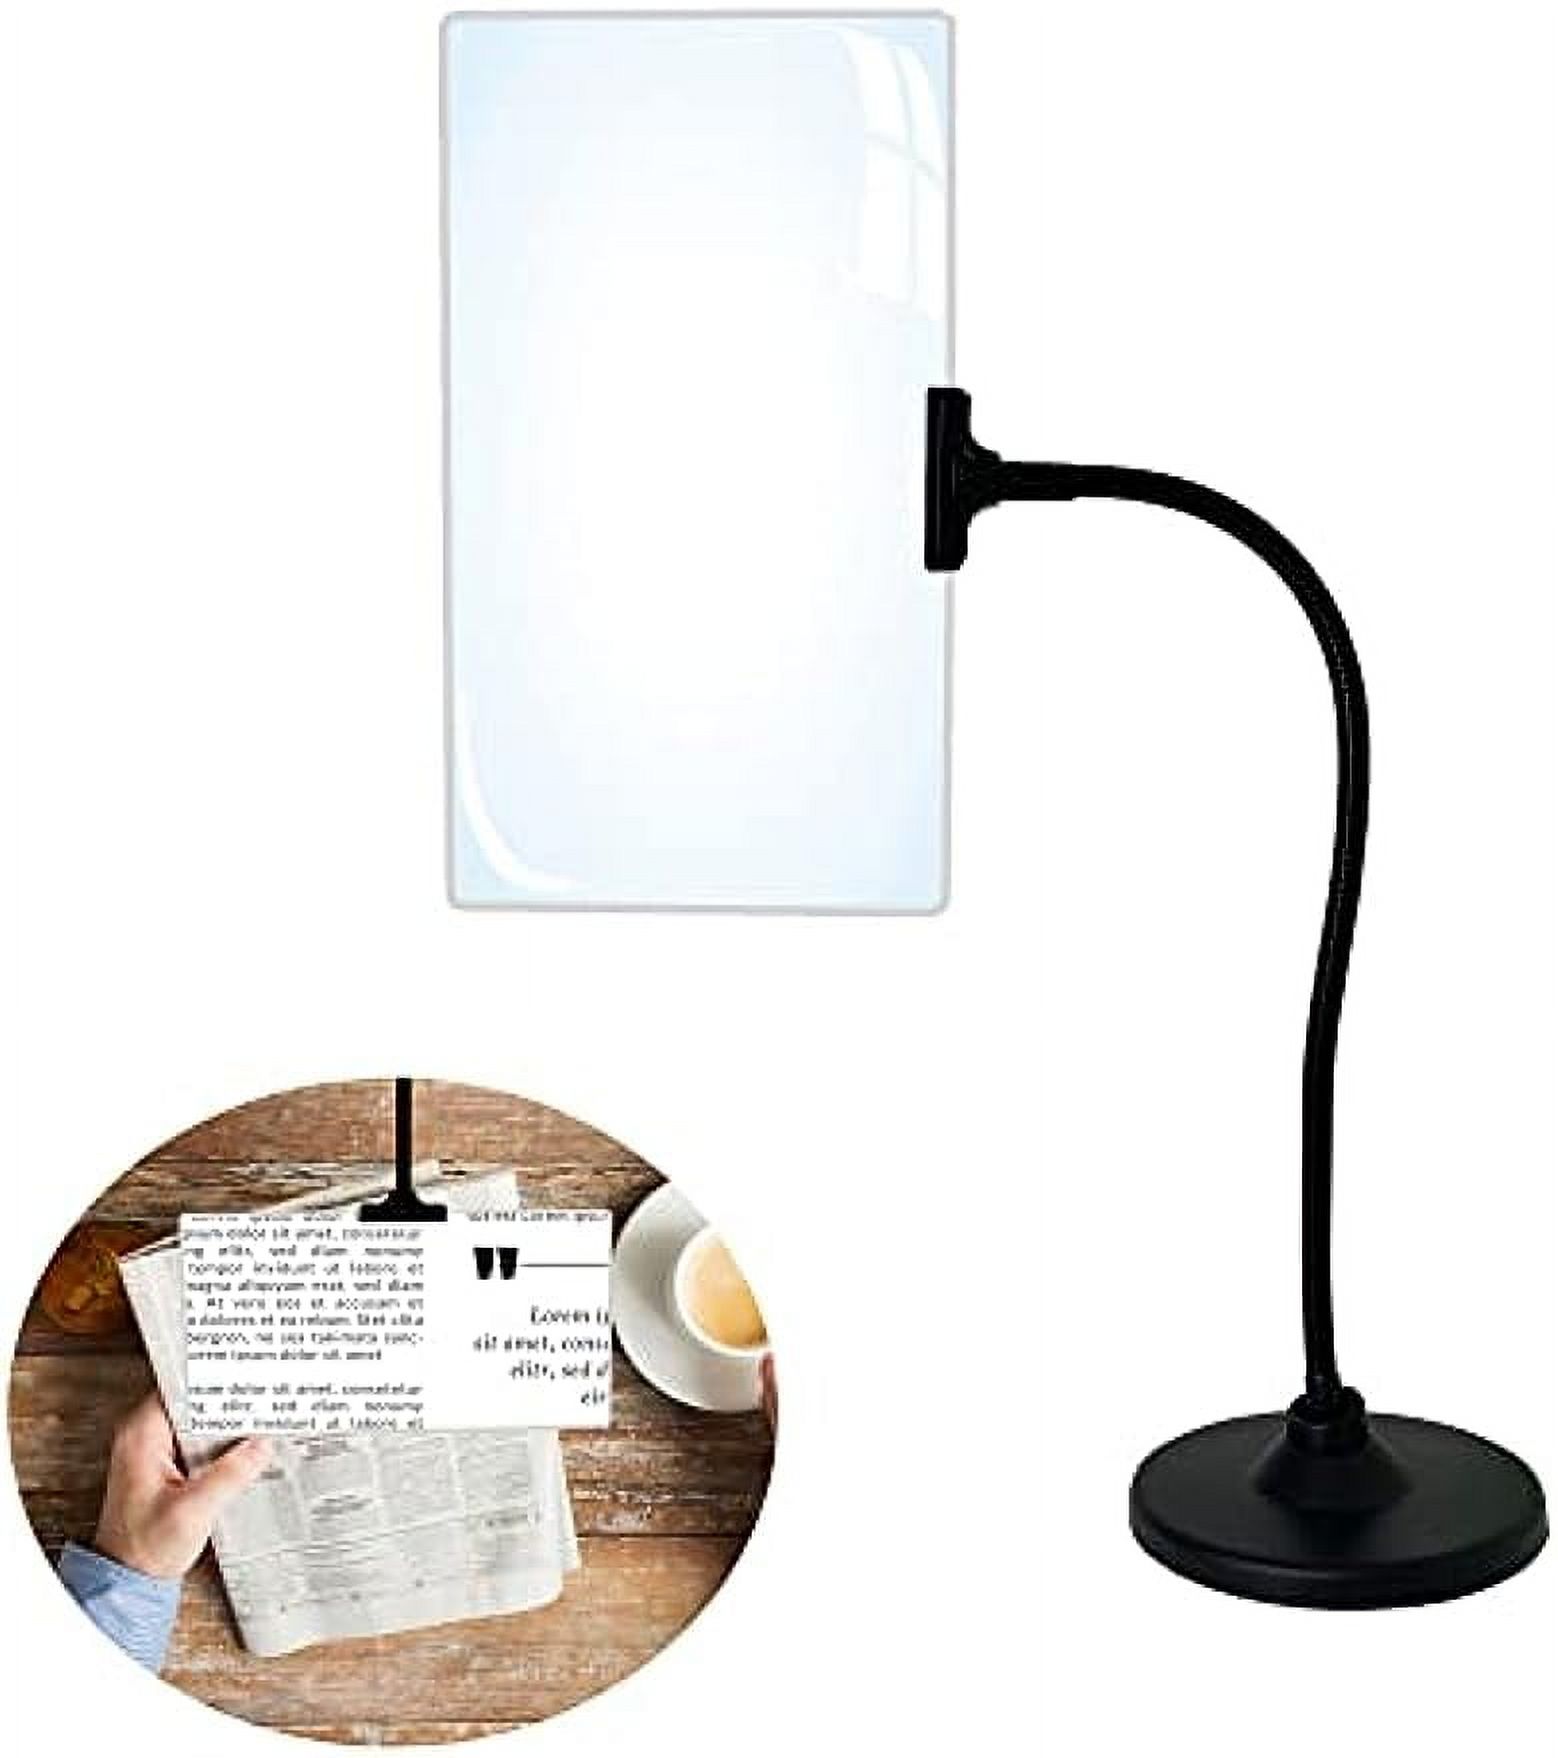 Large Magnifying Glass with Stand Hands Free Floor Magnifier Flexible Full Book Page Magnifying Gifts for Reading, Painting, Sewing, Phone, for